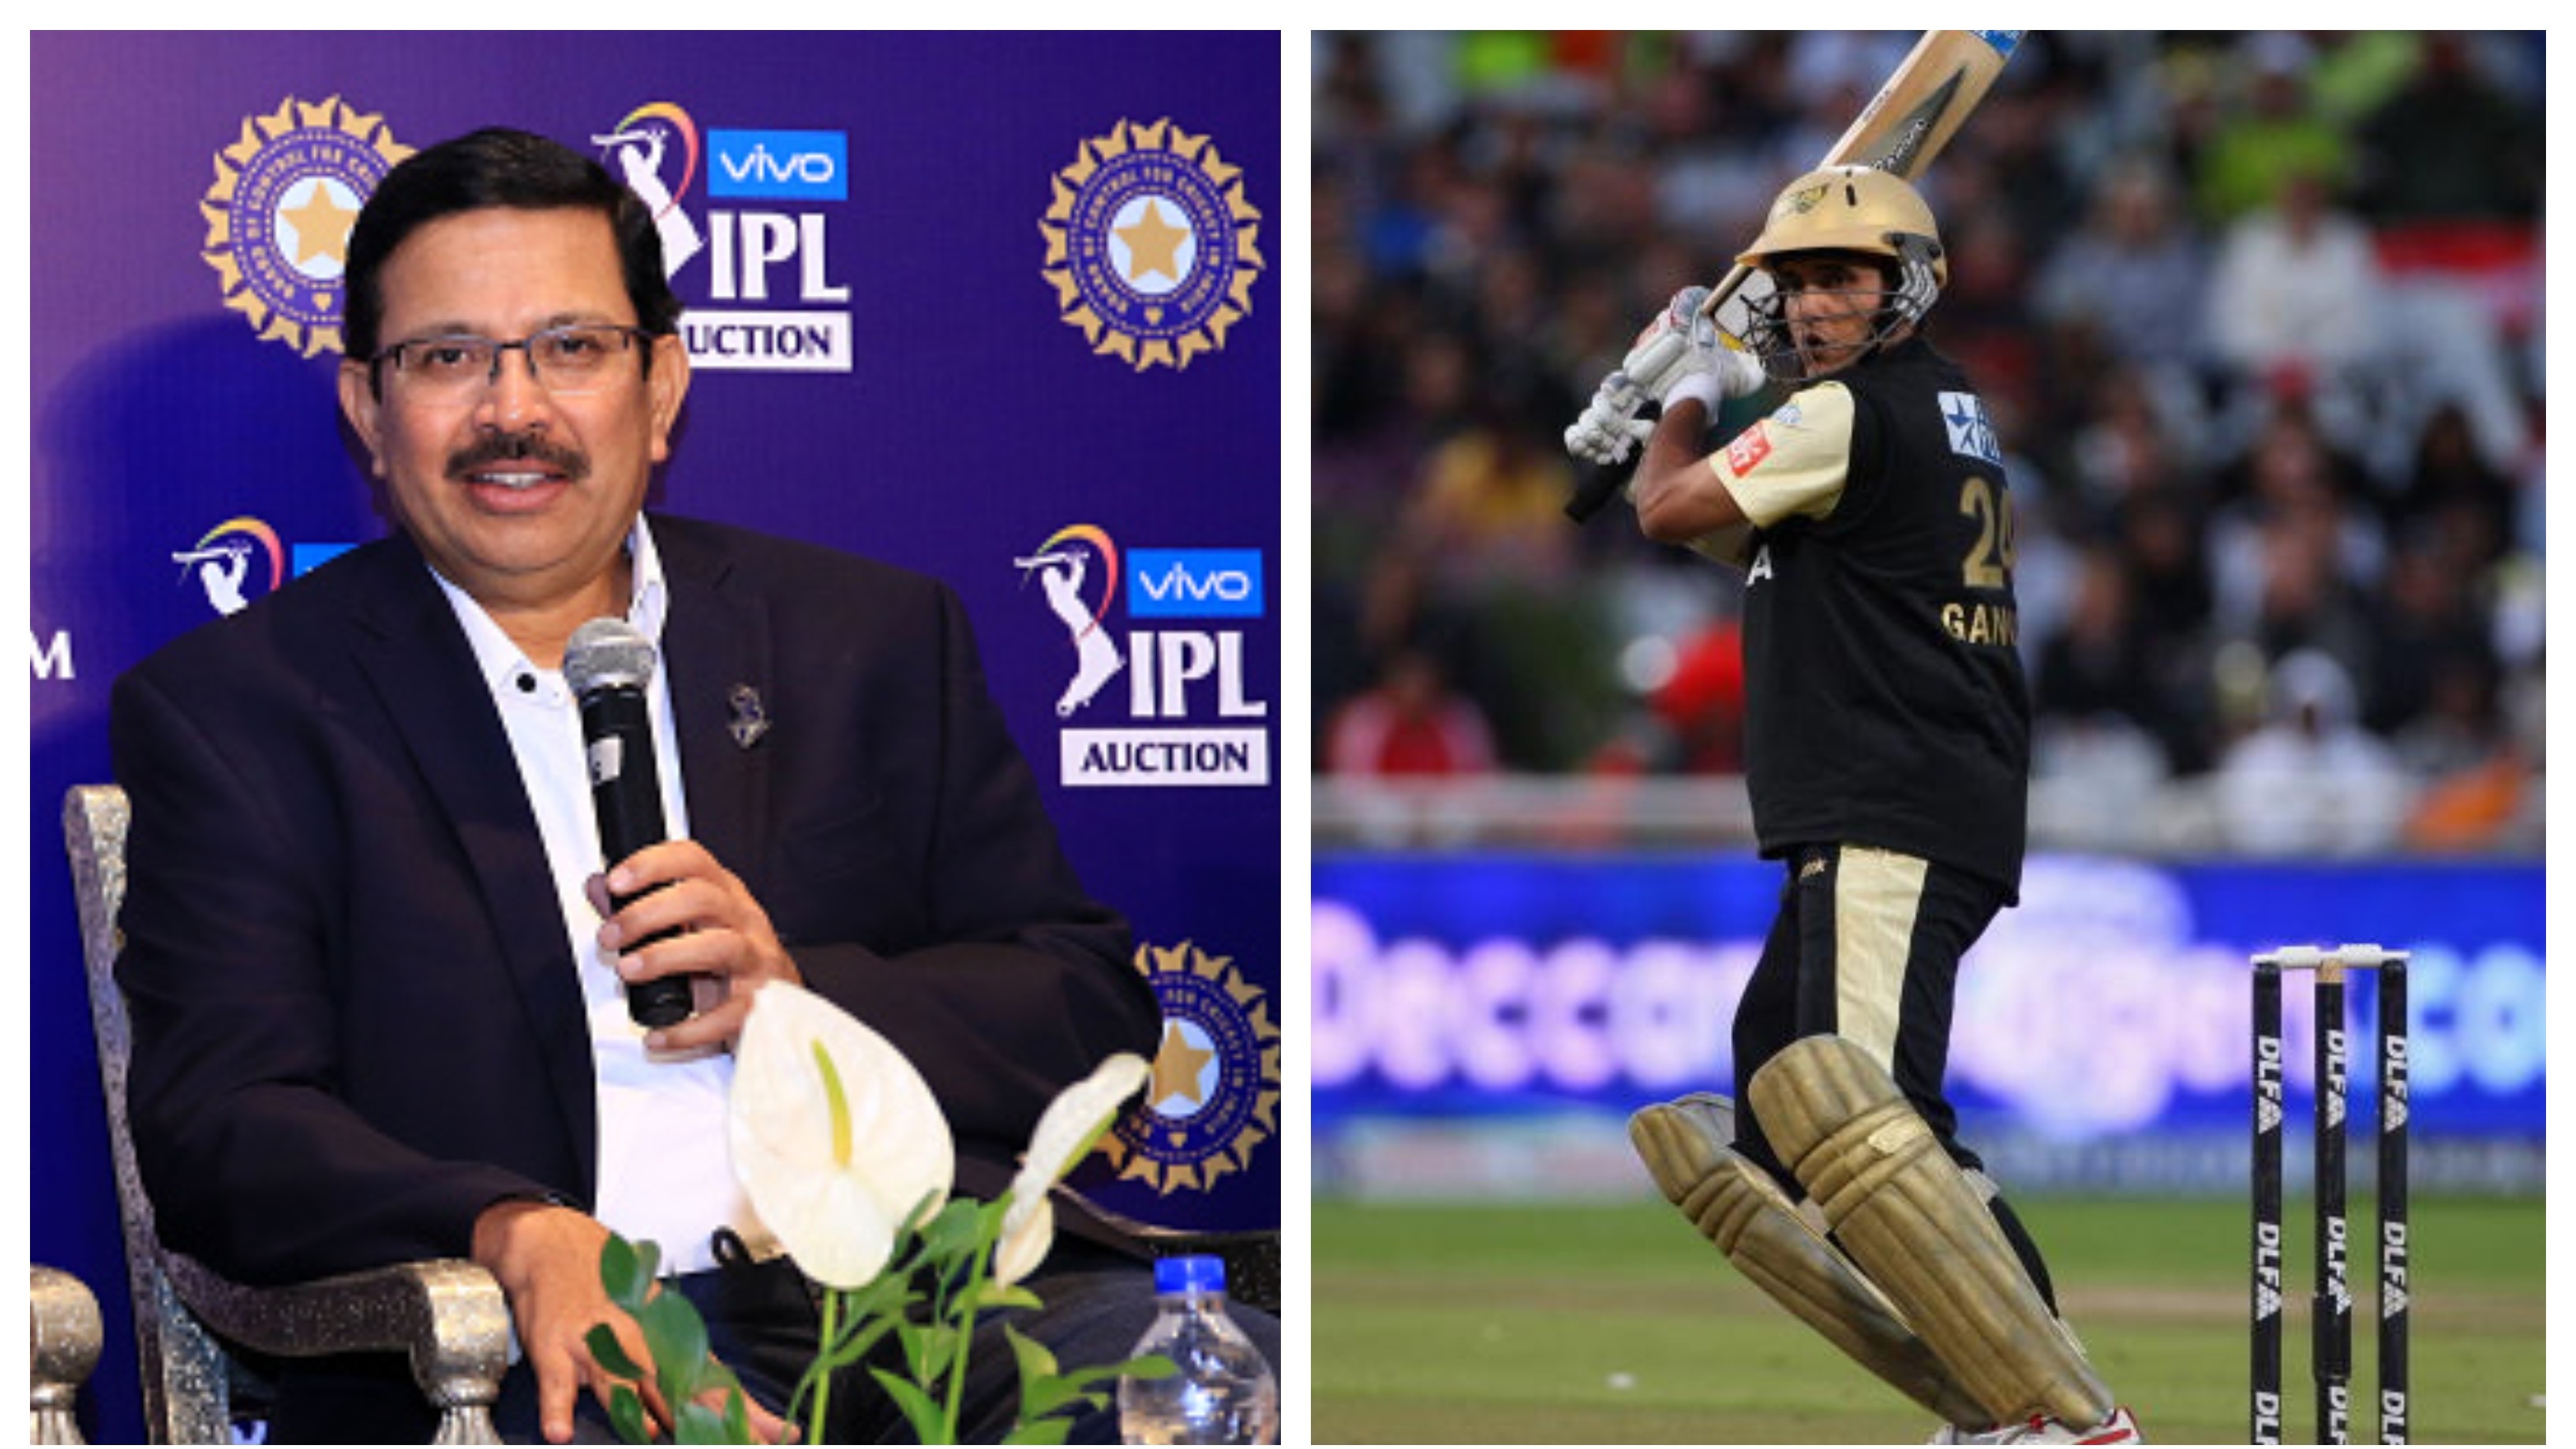 “It was tough”, KKR CEO Venky Mysore recalls not retaining Sourav Ganguly in 2011